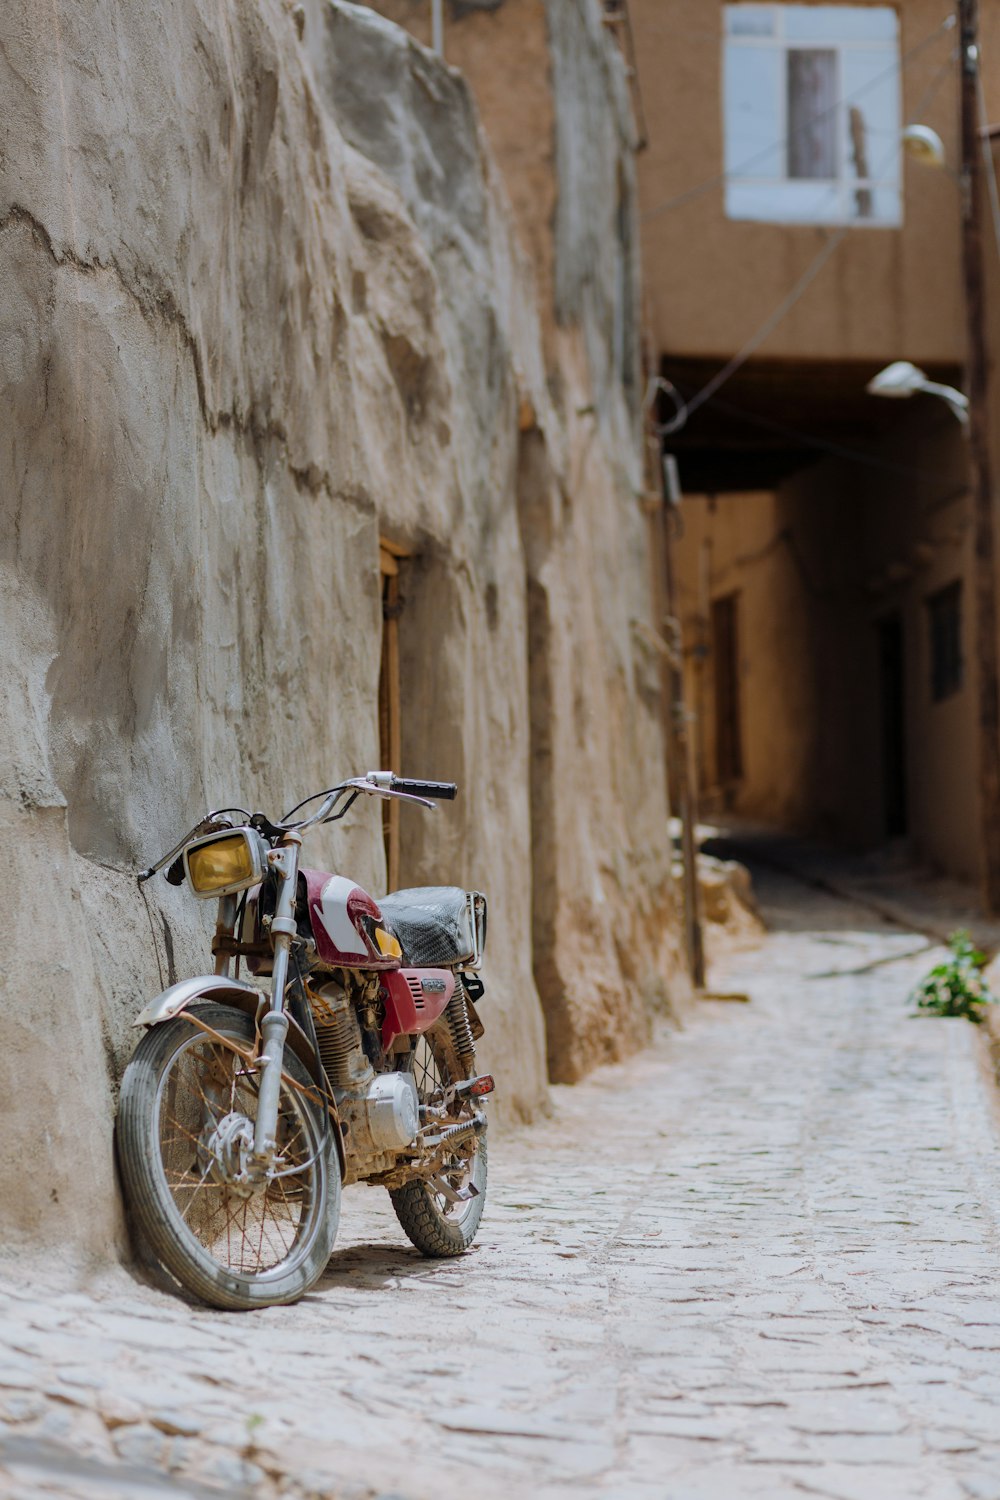 a motorcycle is parked on a cobblestone street